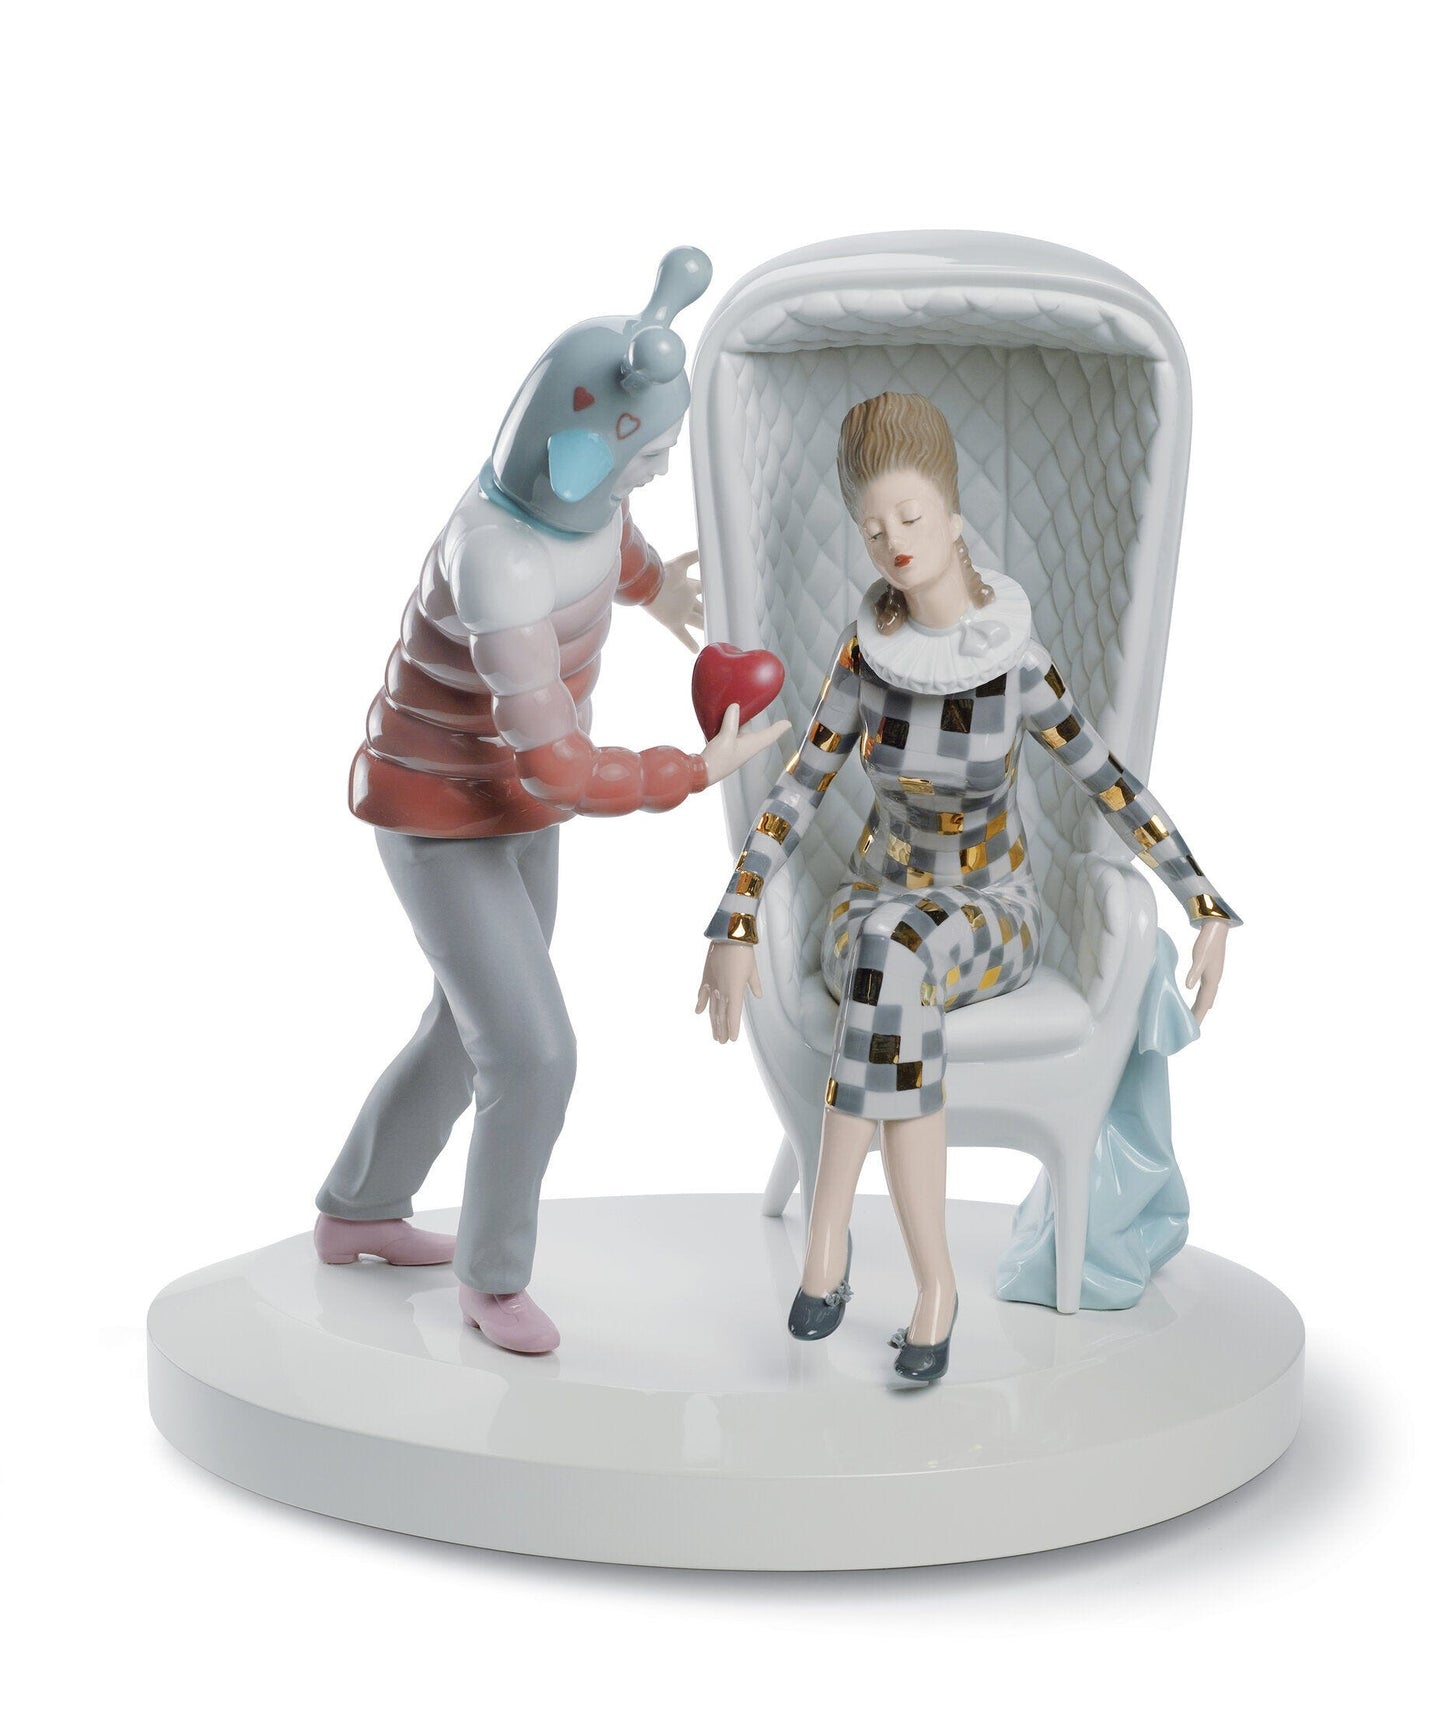 The Love Explosion Couple Figurine By Jaime Hayon